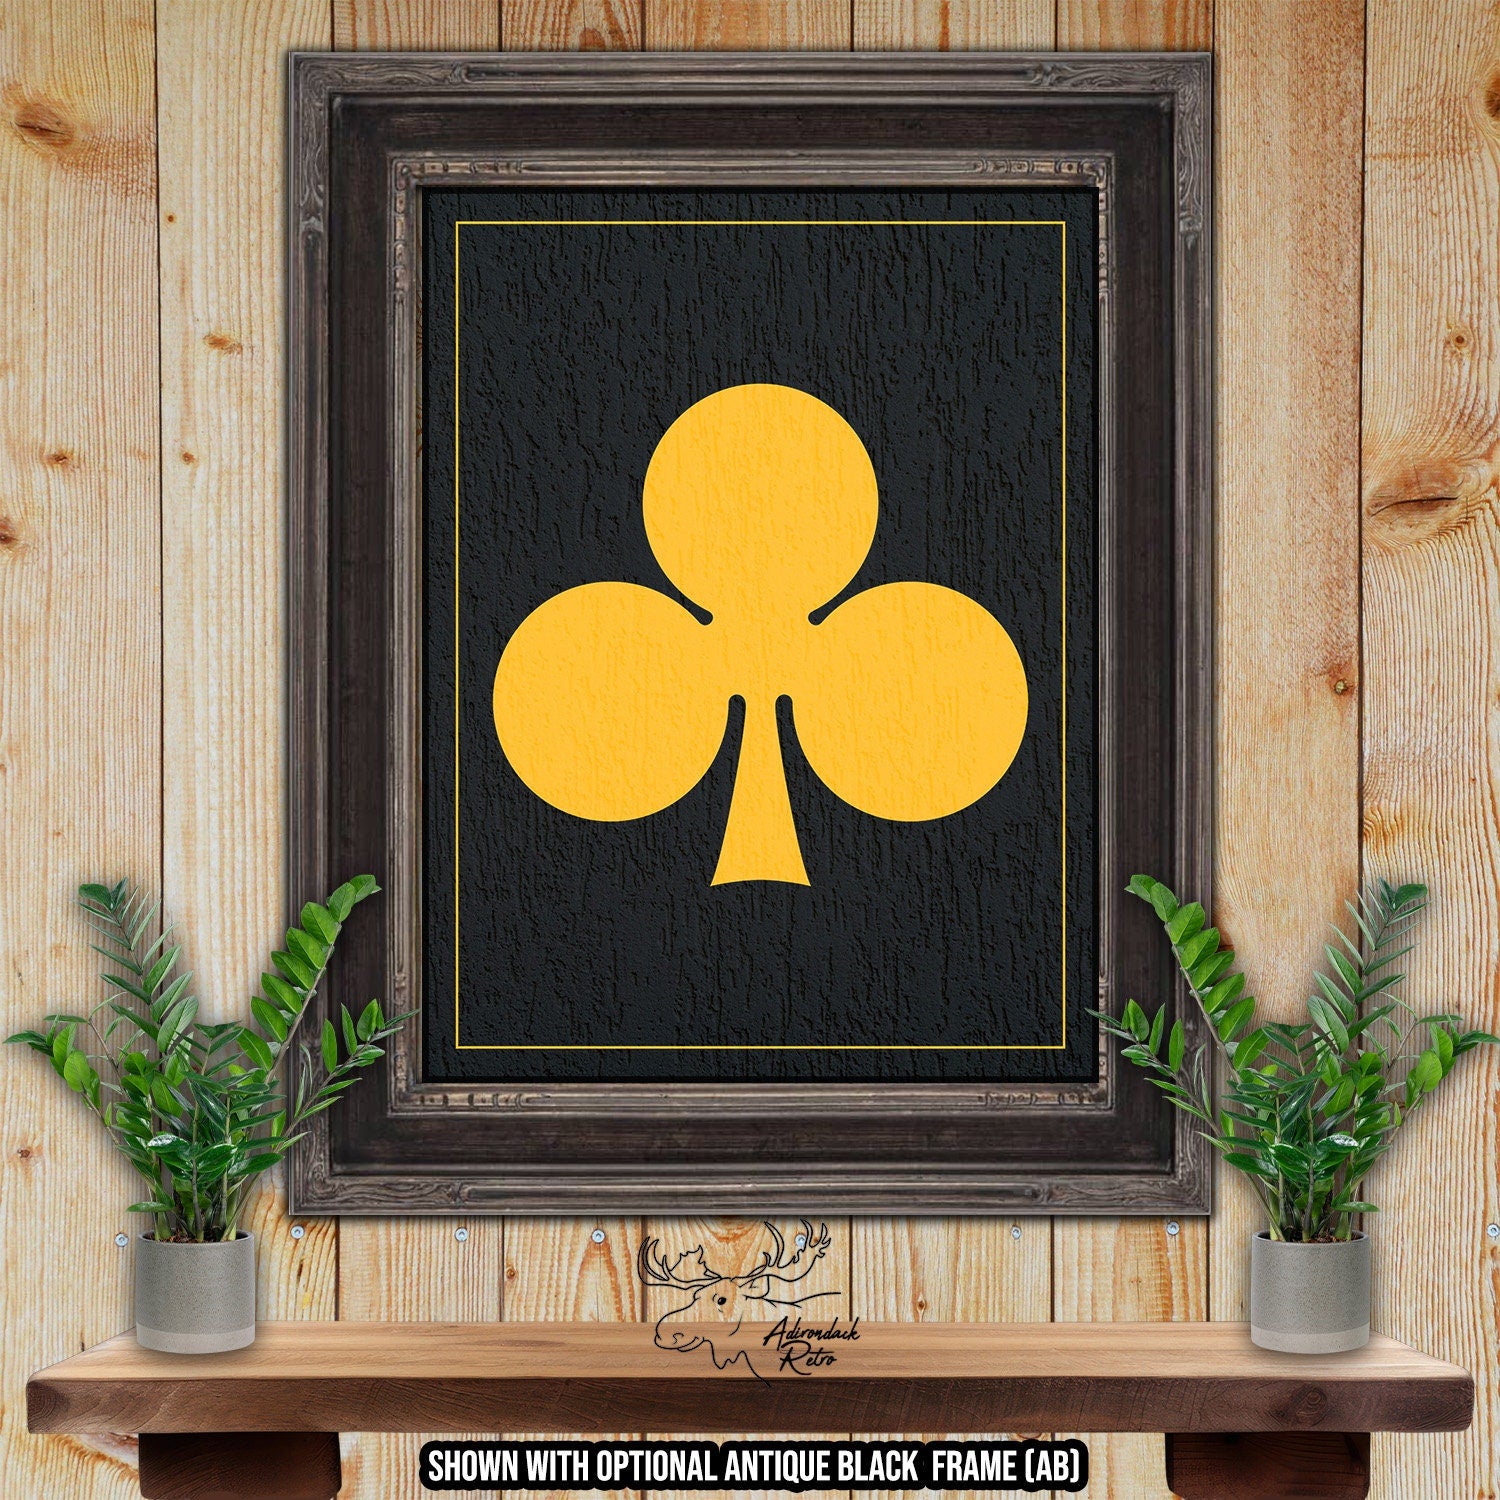 Clubs Playing Card Suit - Black & Gold Fine Art Print at Adirondack Retro